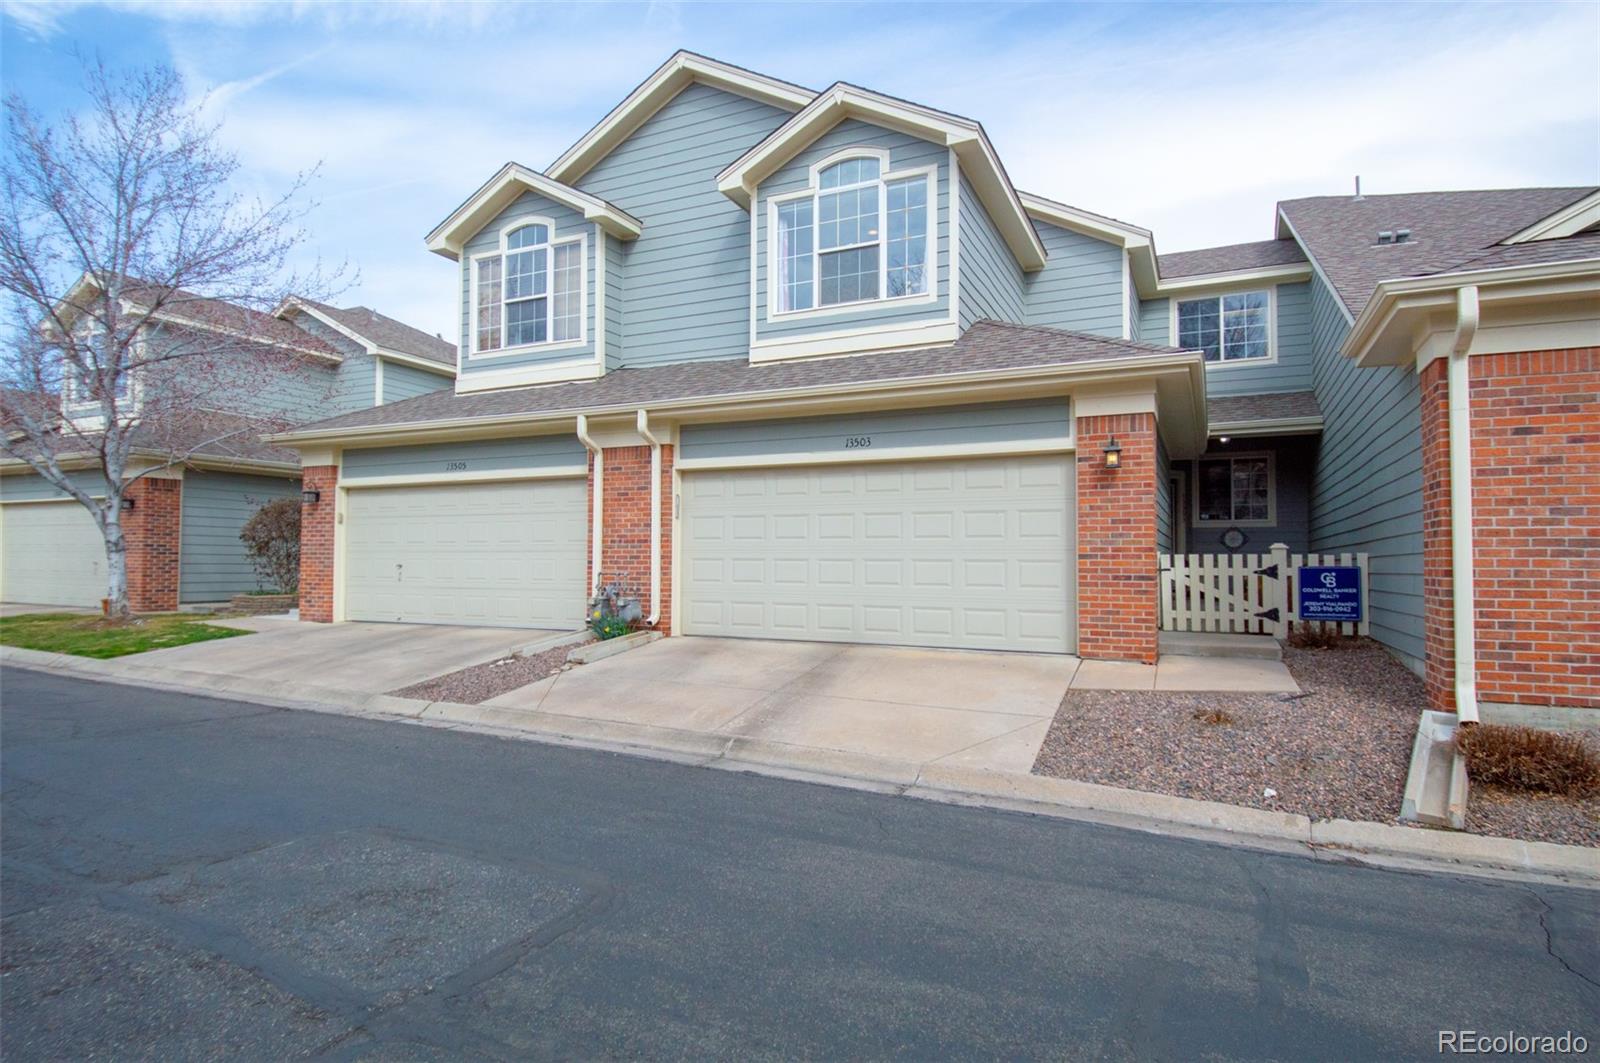 13503 W 63rd Place, arvada MLS: 3293838 Beds: 3 Baths: 3 Price: $542,500